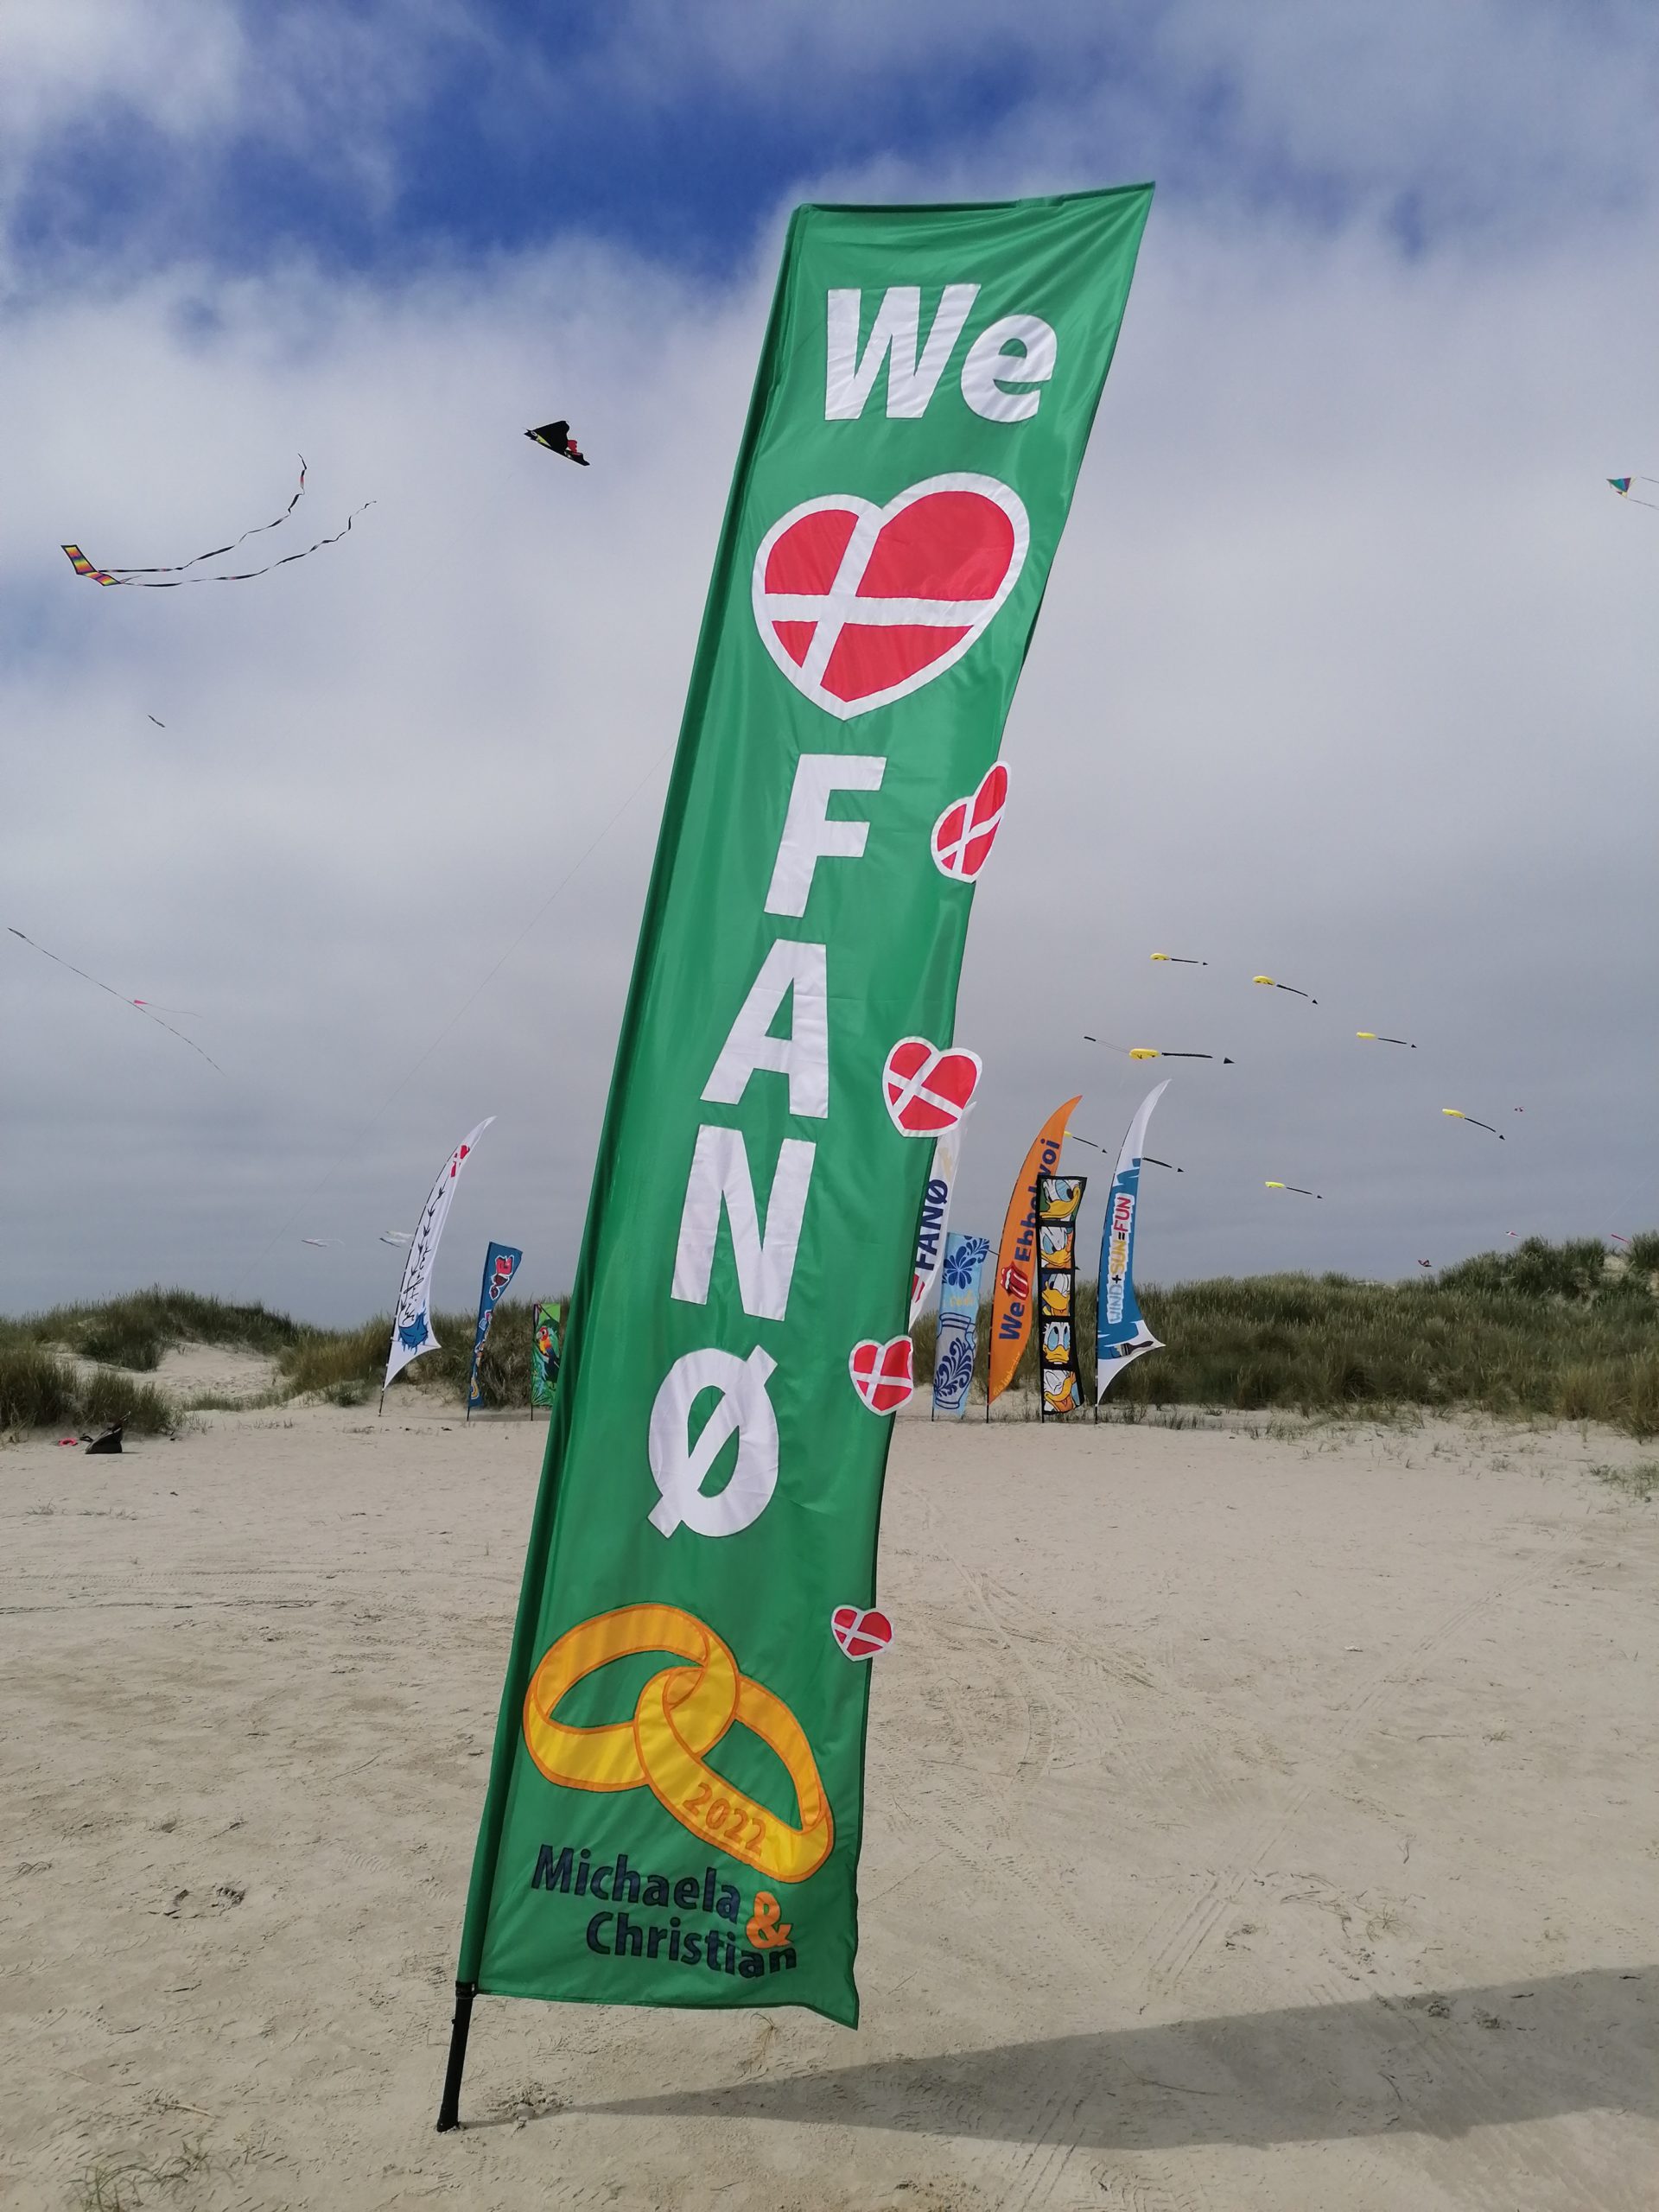 You are currently viewing Banner – We Love Fanø (Hochzeit) (by Florian Janich)